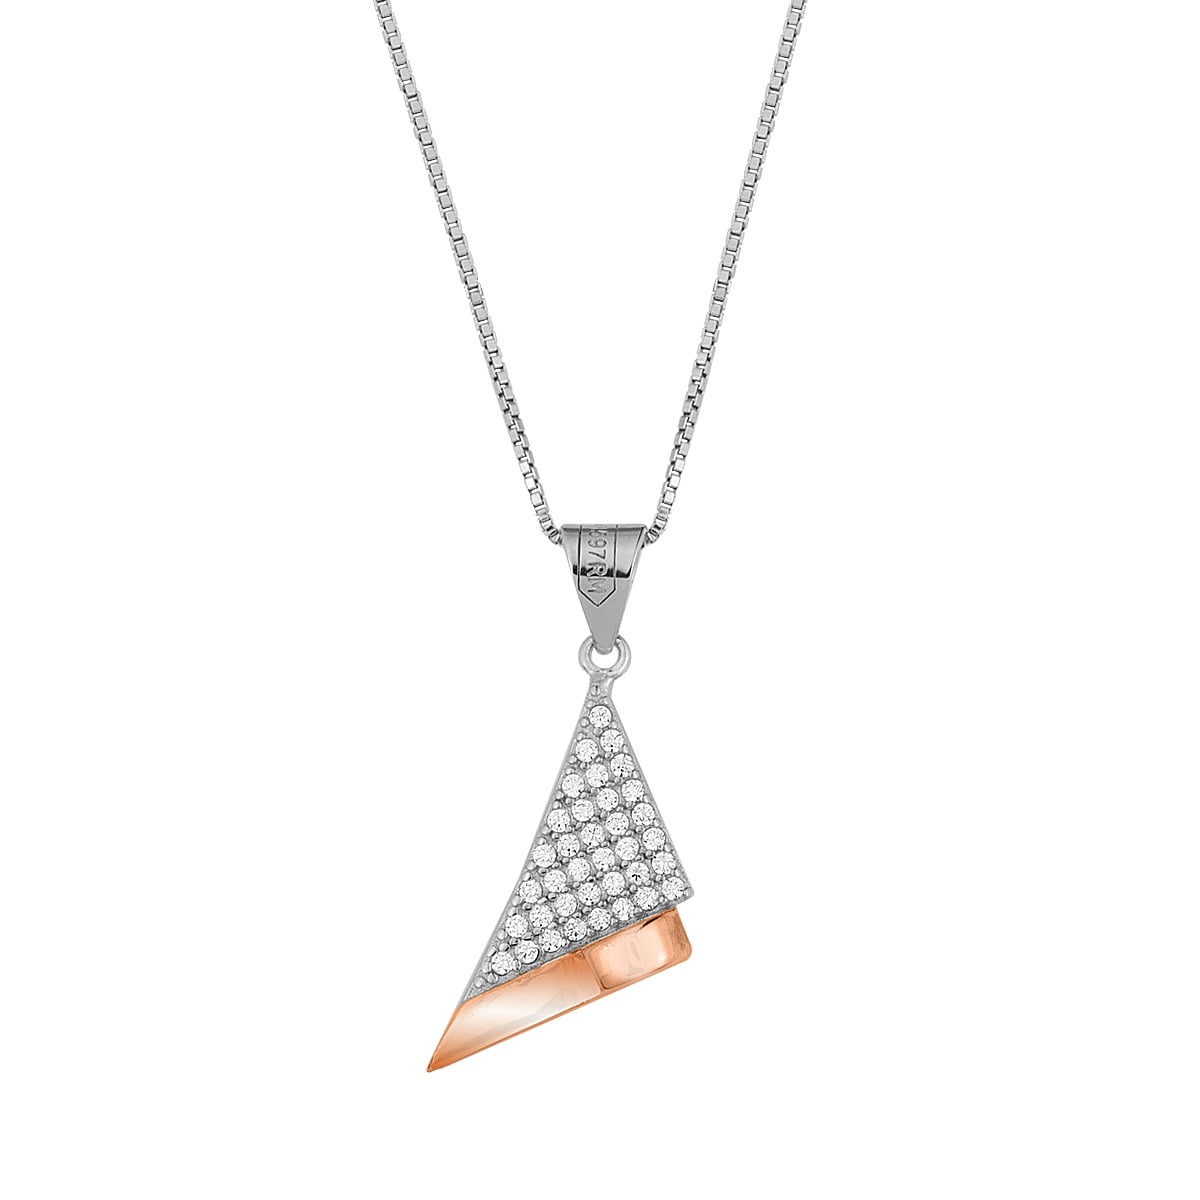 Pendant "Ribbon" triangle, in sterling silver 925°, with white zircons and rose gold plating. Accompanied by a 925° silver chain.